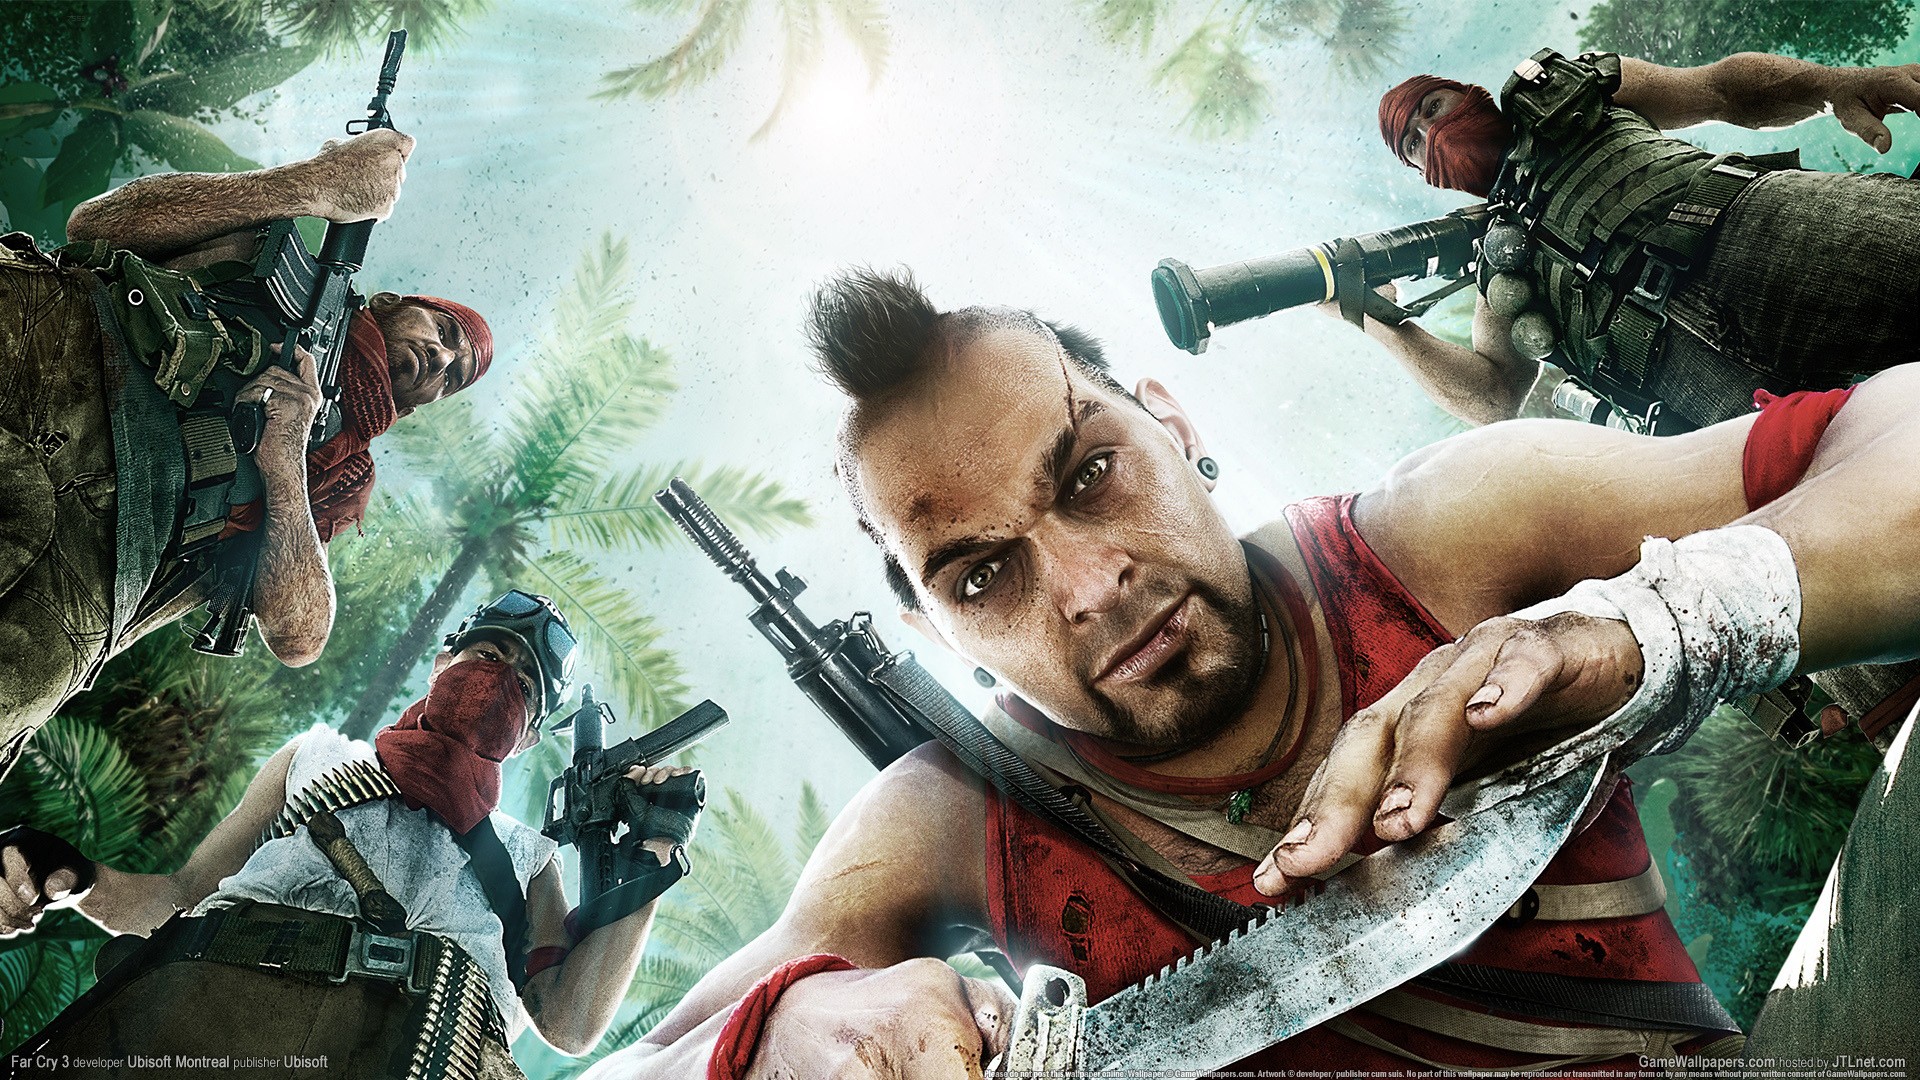 Video Games Far Cry 3 Vaas Ubisoft Video Games Far Cry 3 Video Games Far Cry Far Cry 3 Far Cry 3 Vaa 1920x1080